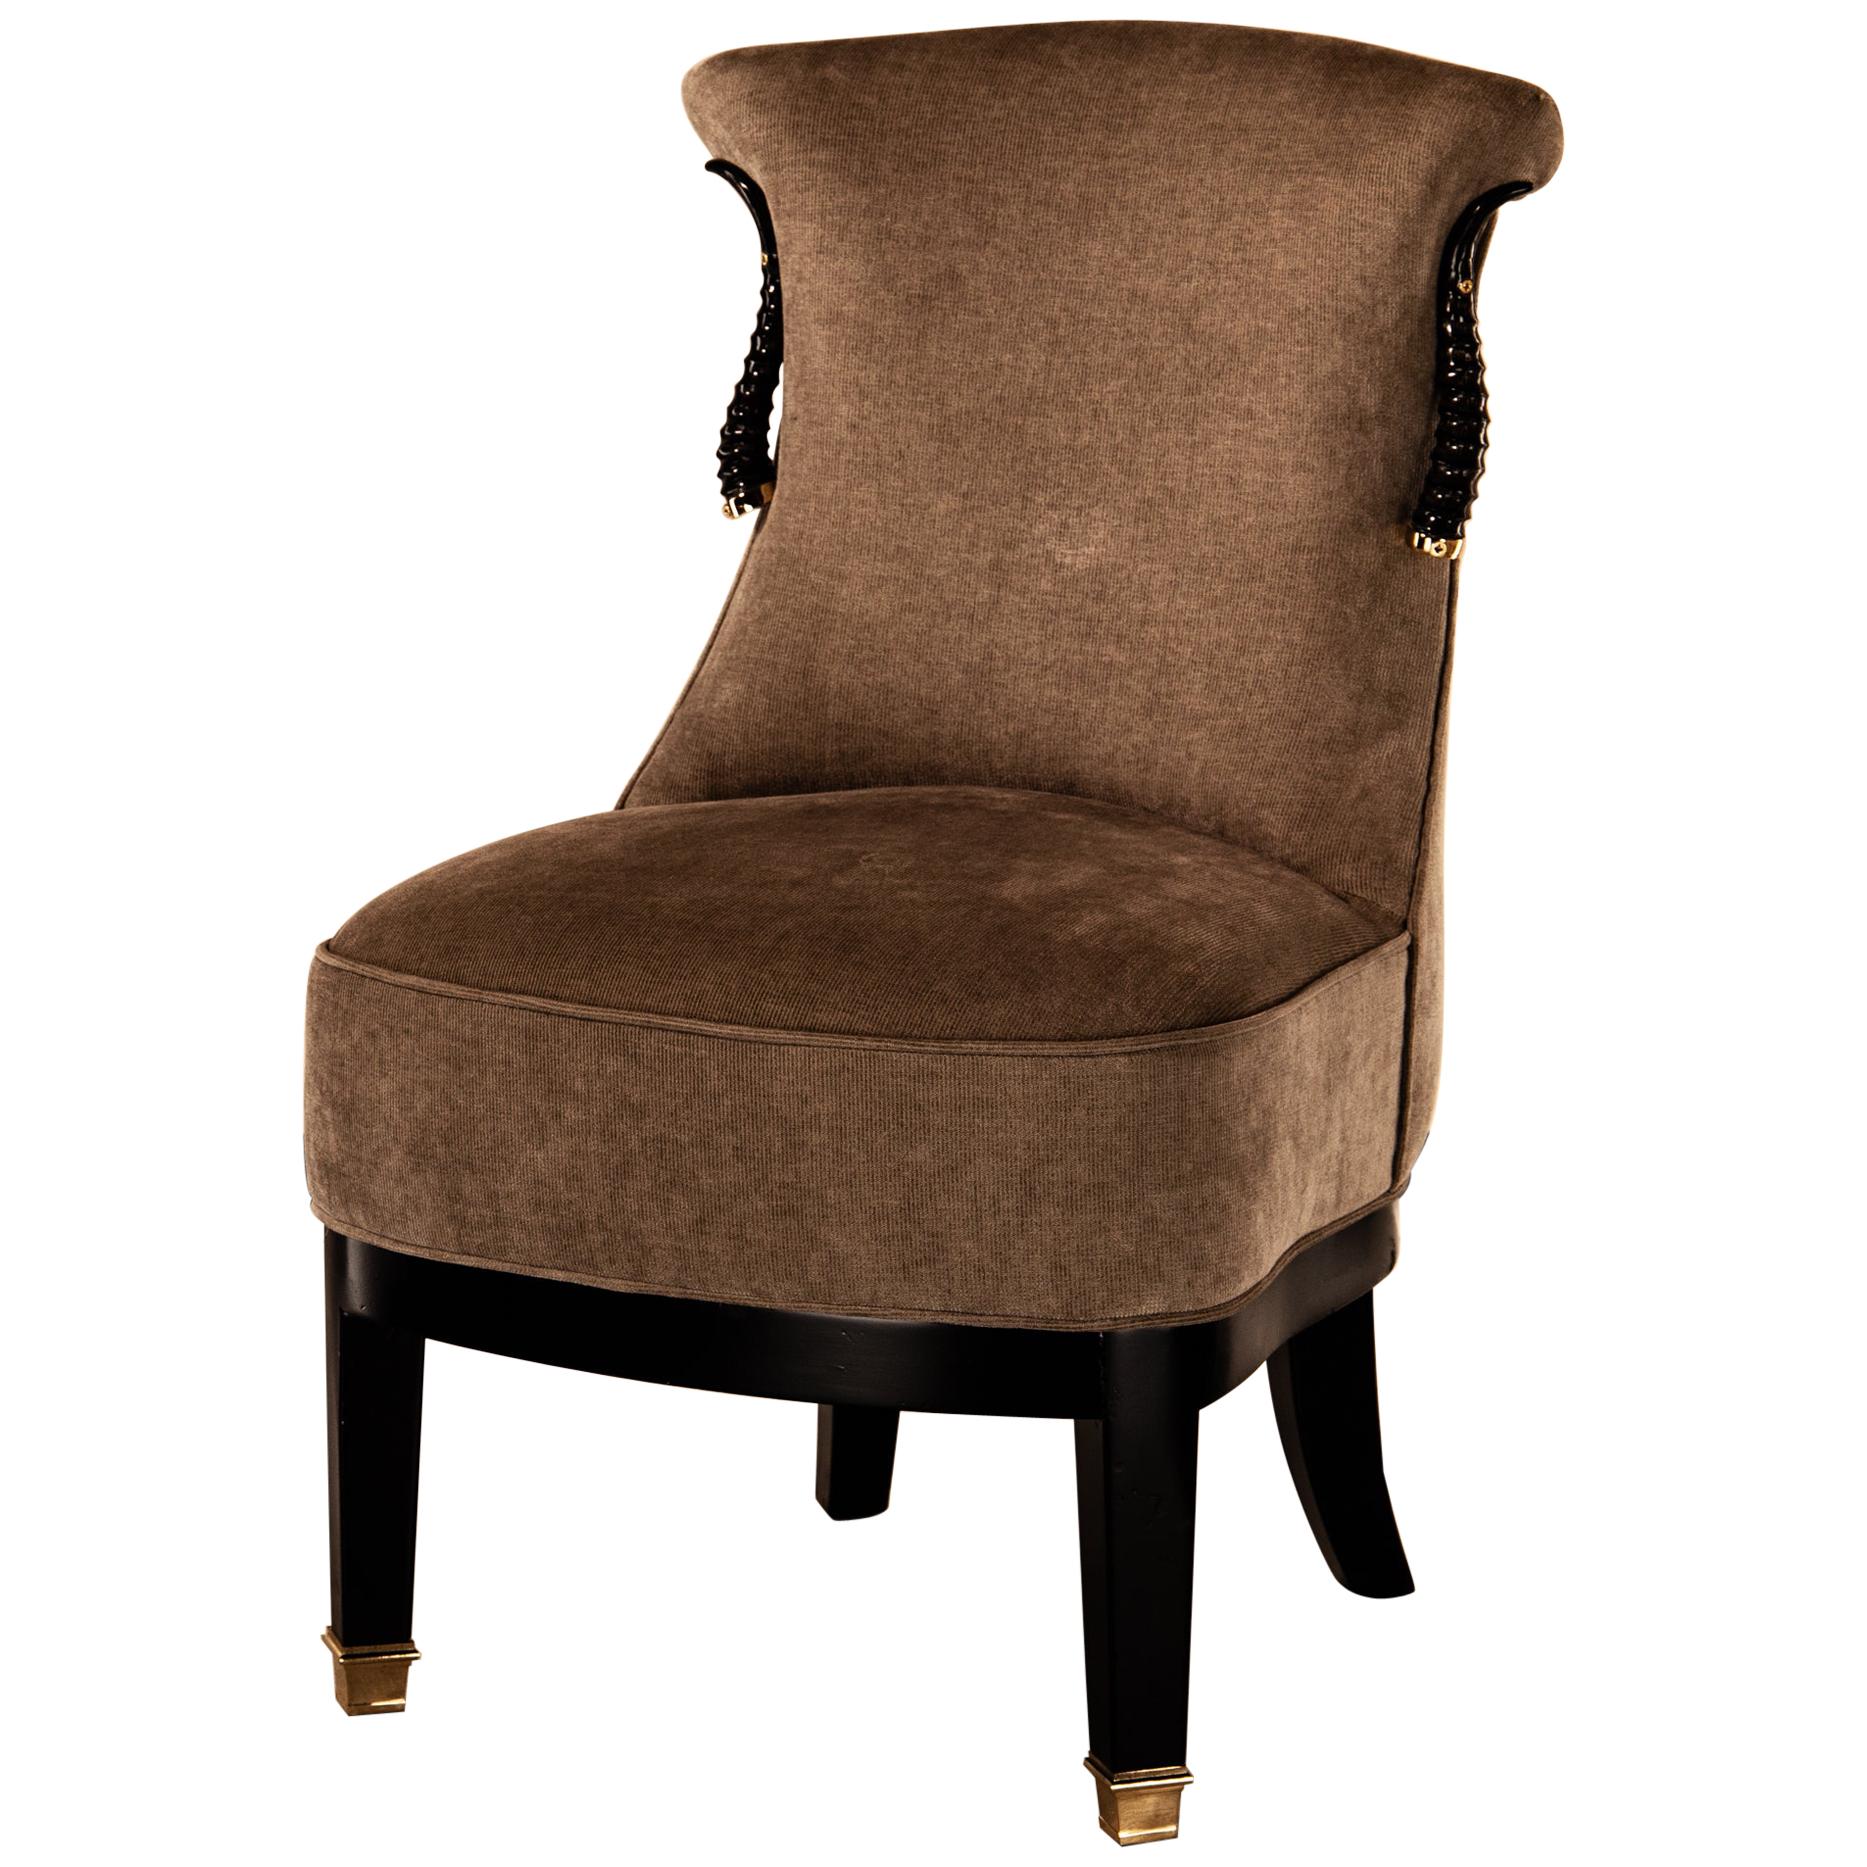 Small Upholstered Chair Gazzella, Natural Horn, Solid Brass Finials and Details For Sale